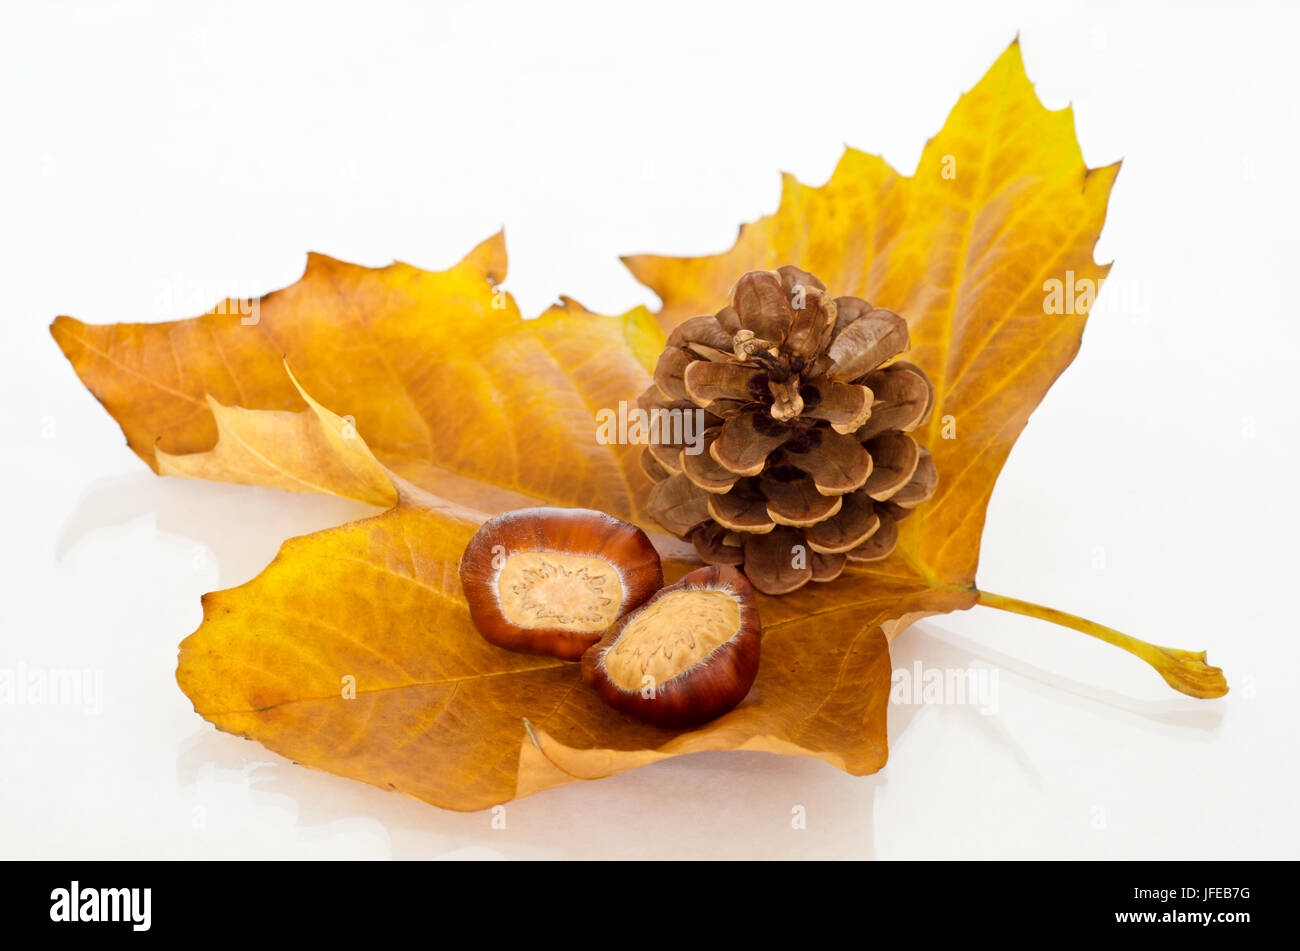 A single Sycamore leaf  in Autumn shades of gold and orange, facing upwards and holding two chestnuts (conkers) and a fir cone.  Reflective surface be Stock Photo